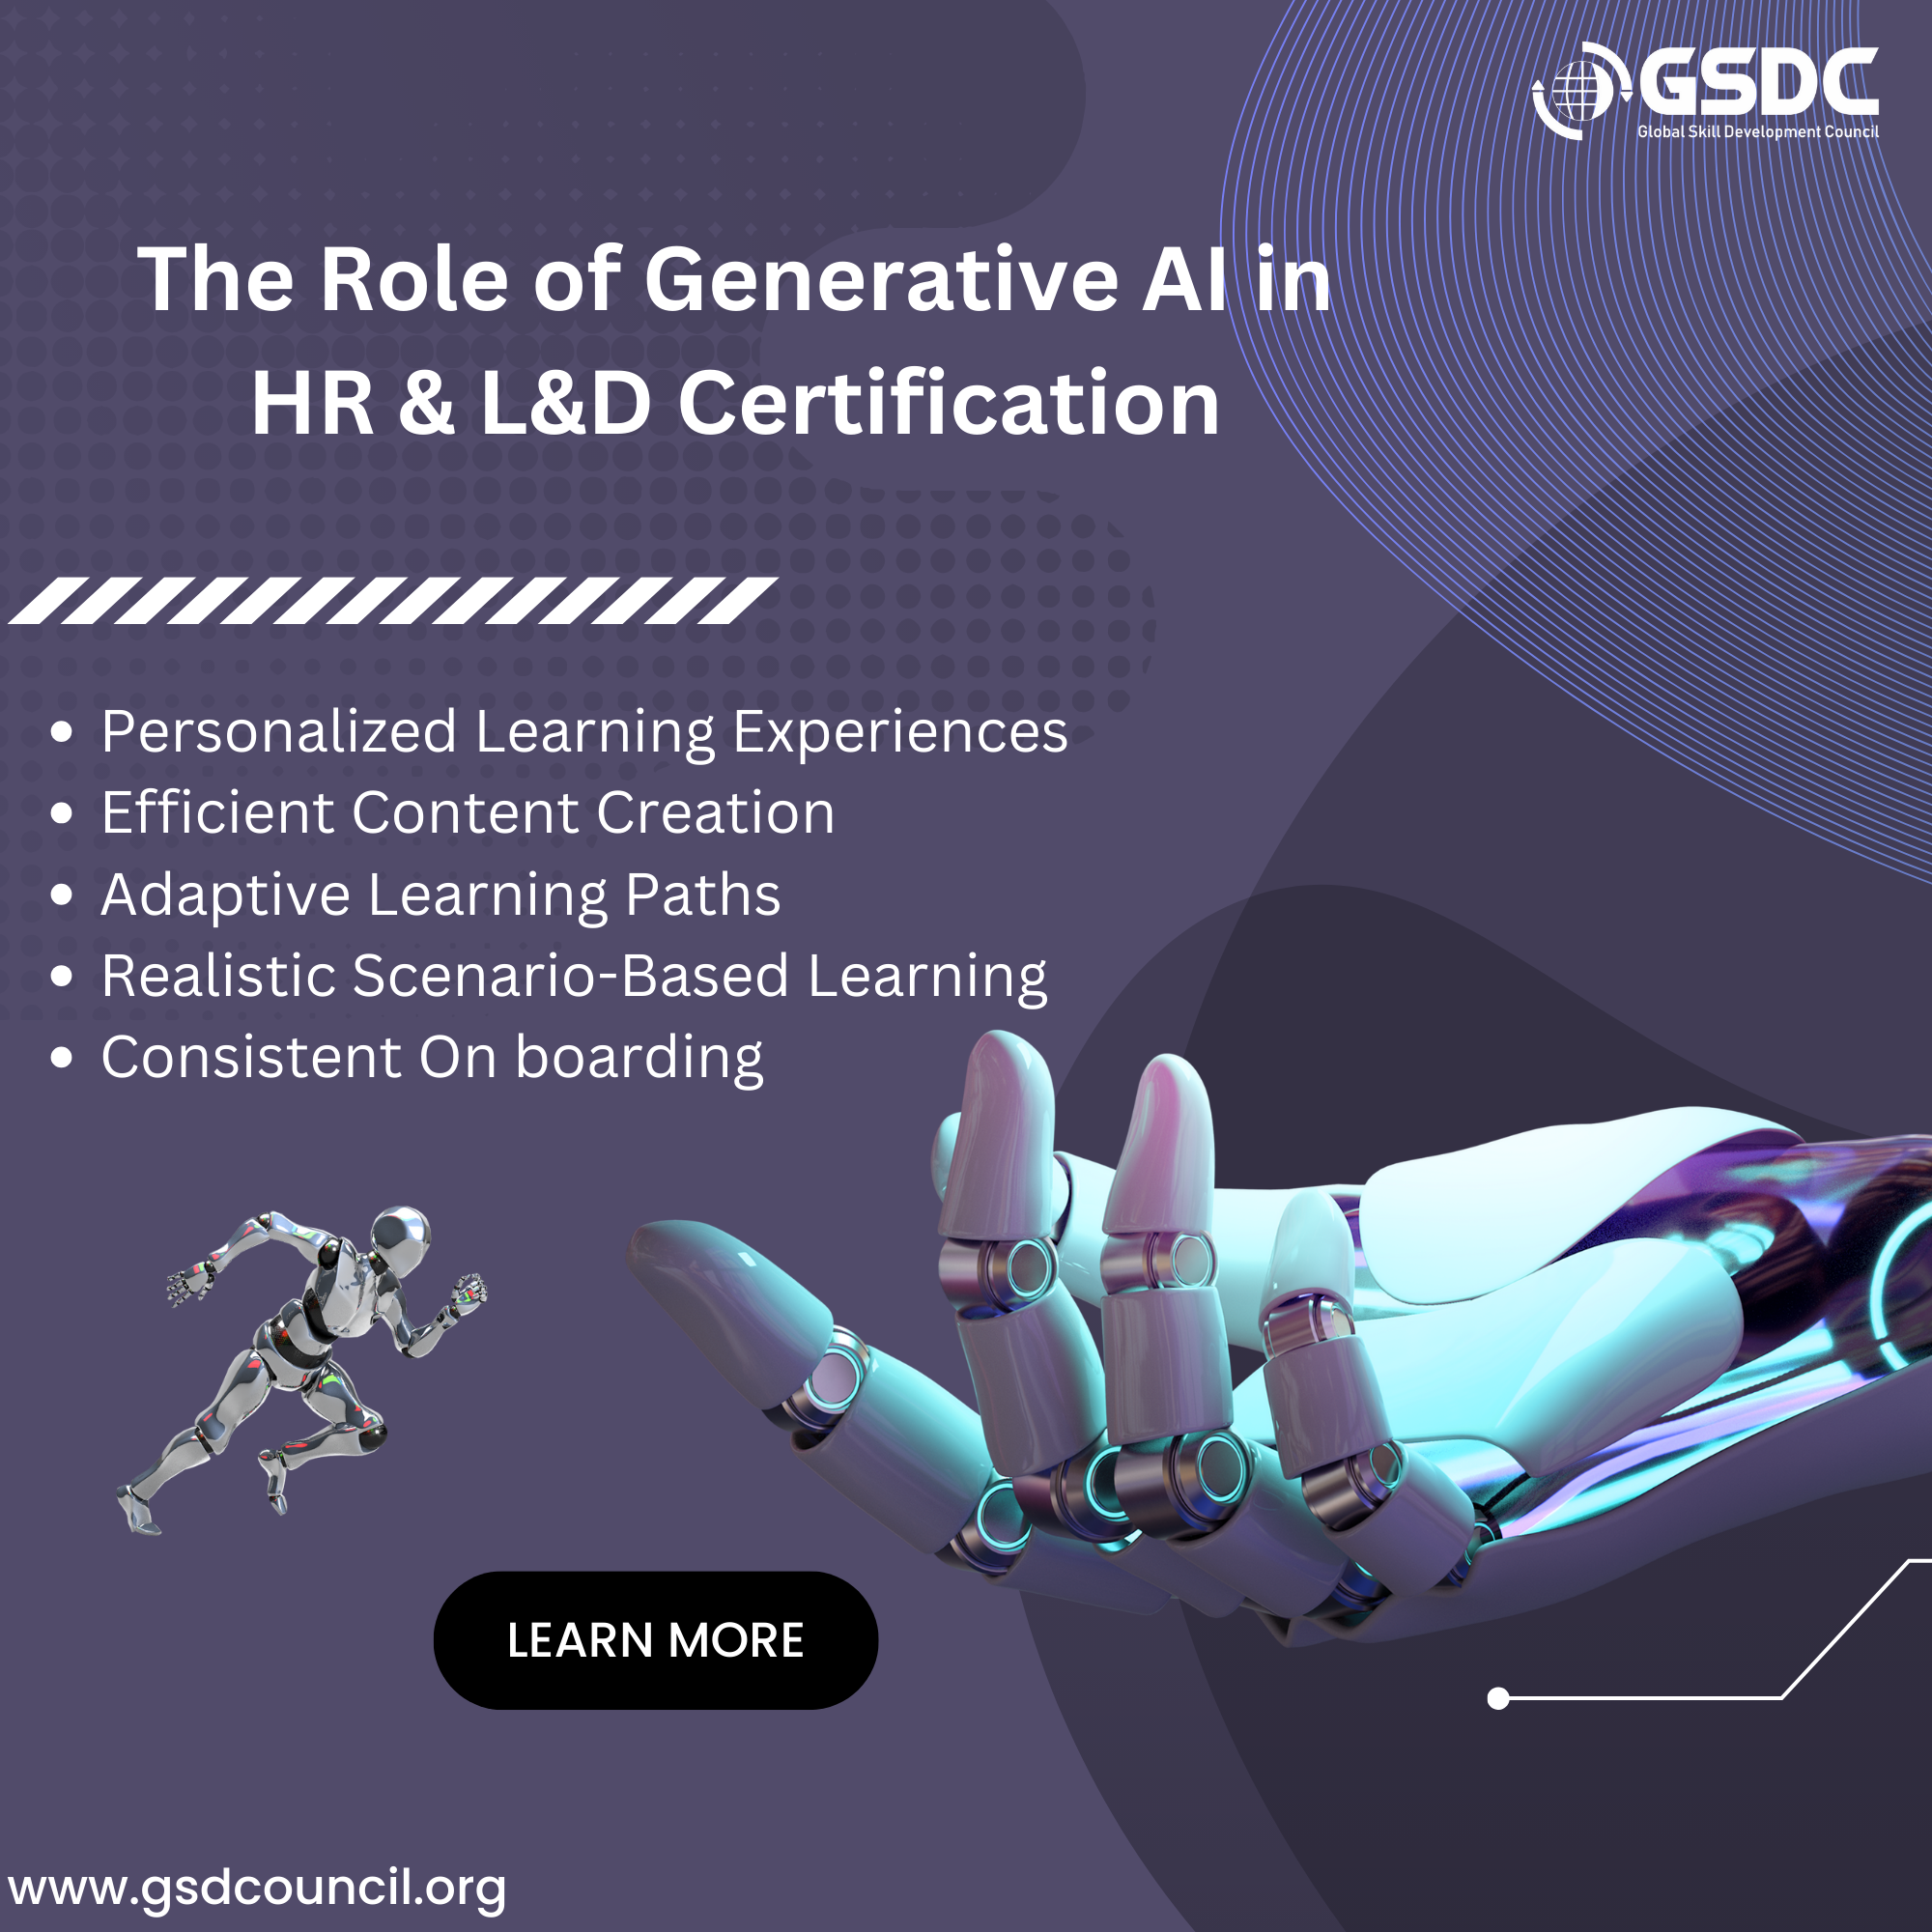 The Role of Generative AI in HR and L&D Certification